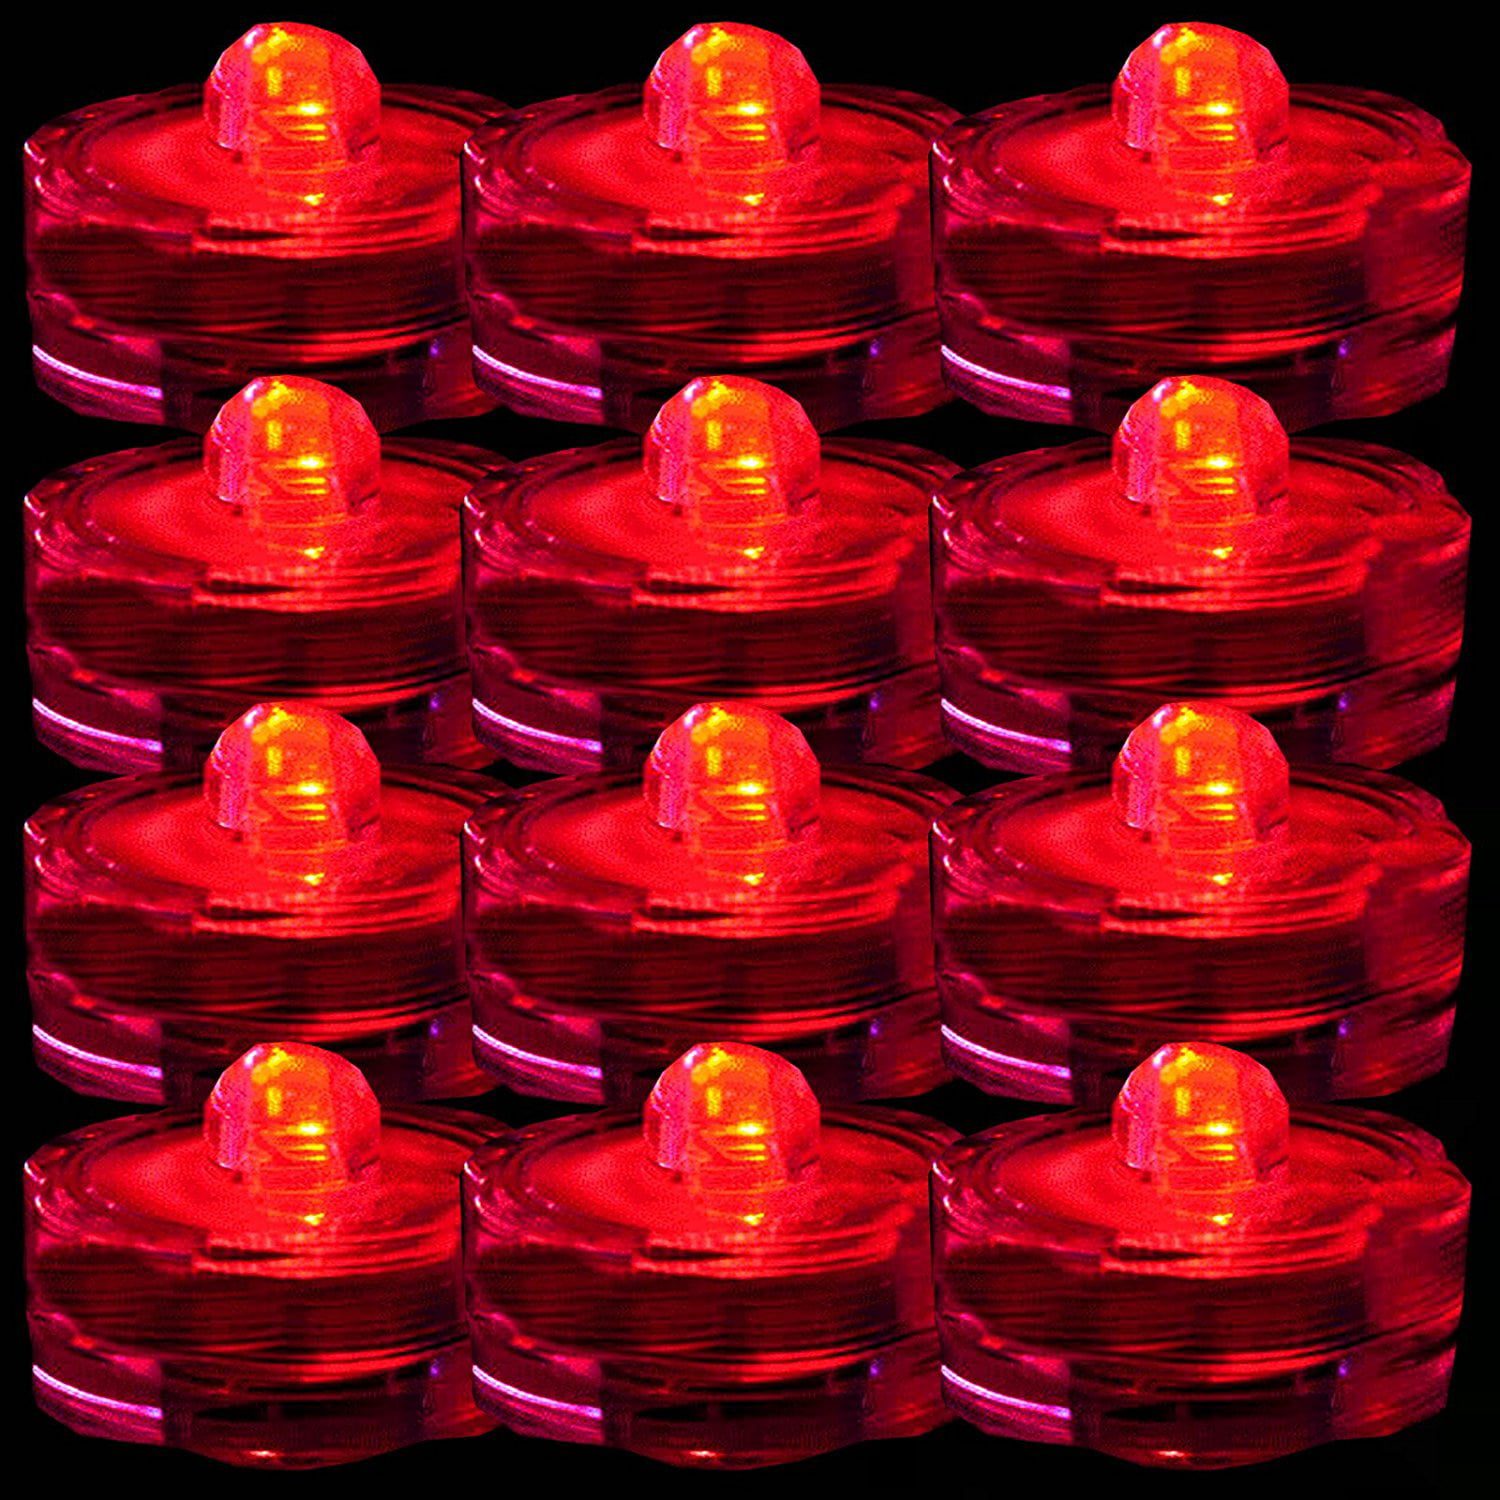 Waterproof Submersible Led Lights Tea Lights For Wedding , Party, Decoration  (36 Pieces Red) By BcTlyInc Ship from US